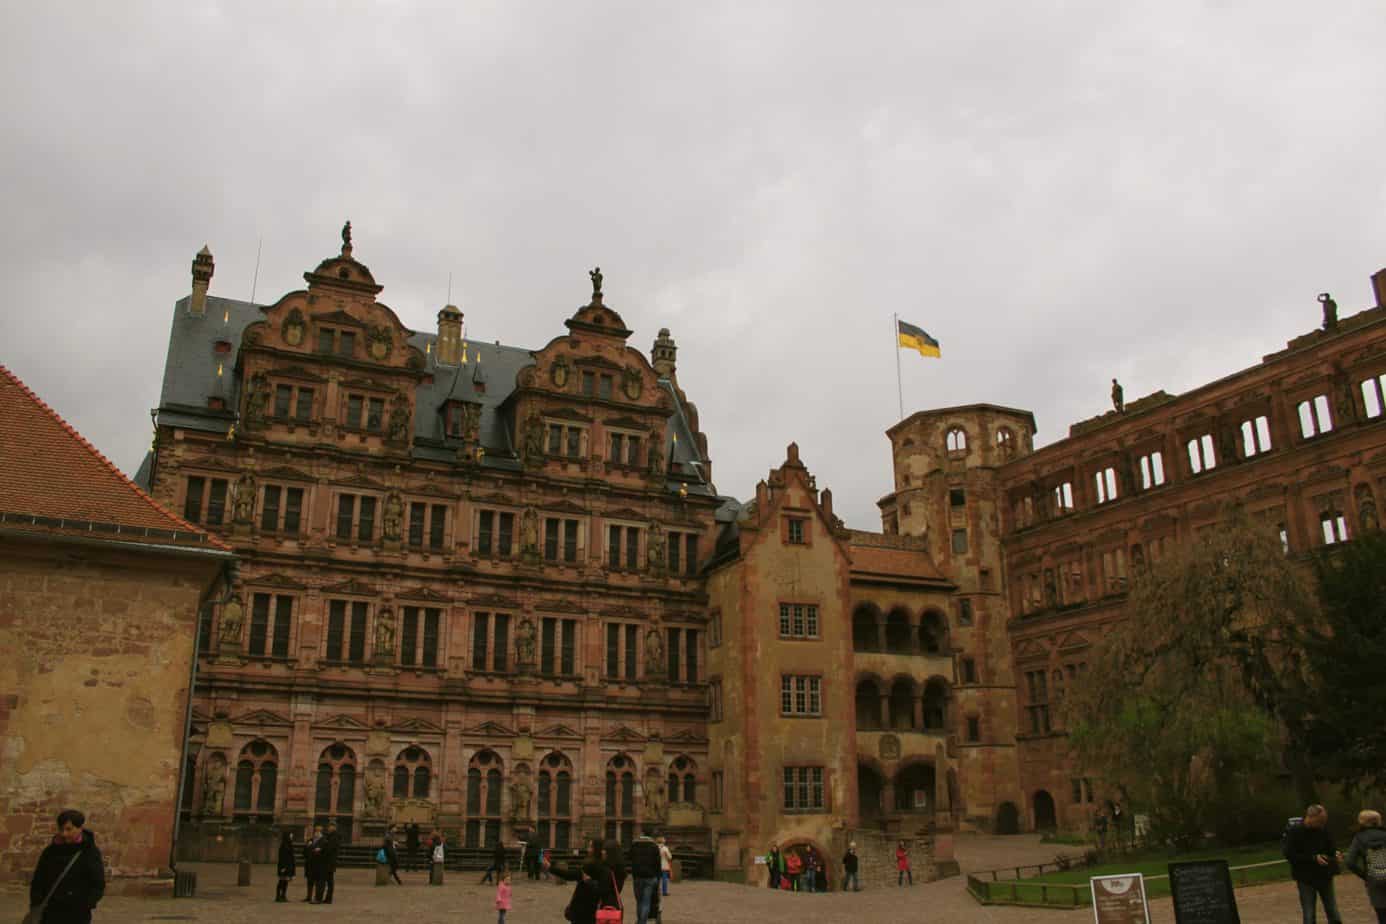 People walk around a square next to tall brick buildings with a flag.